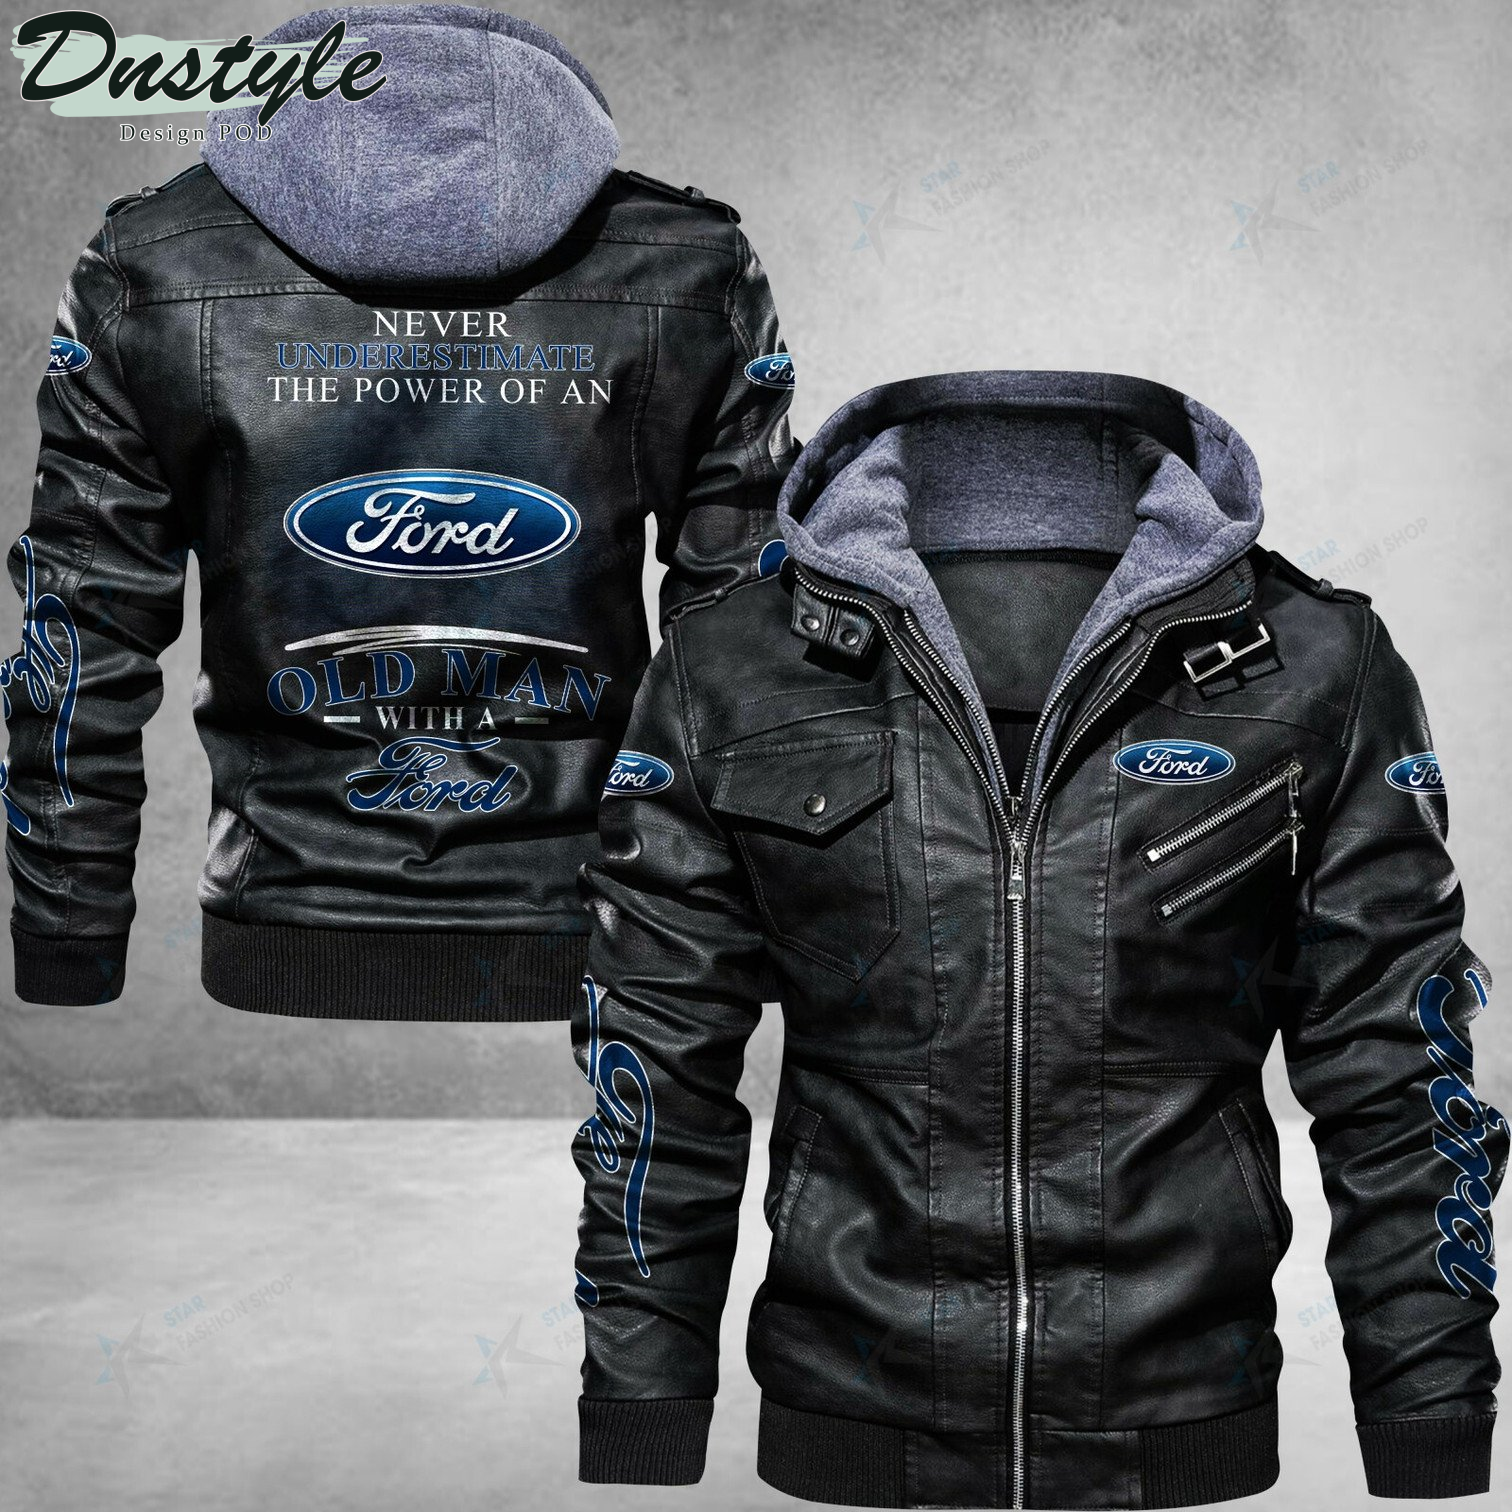 Ford never underestimate the power of an old man leather jacket